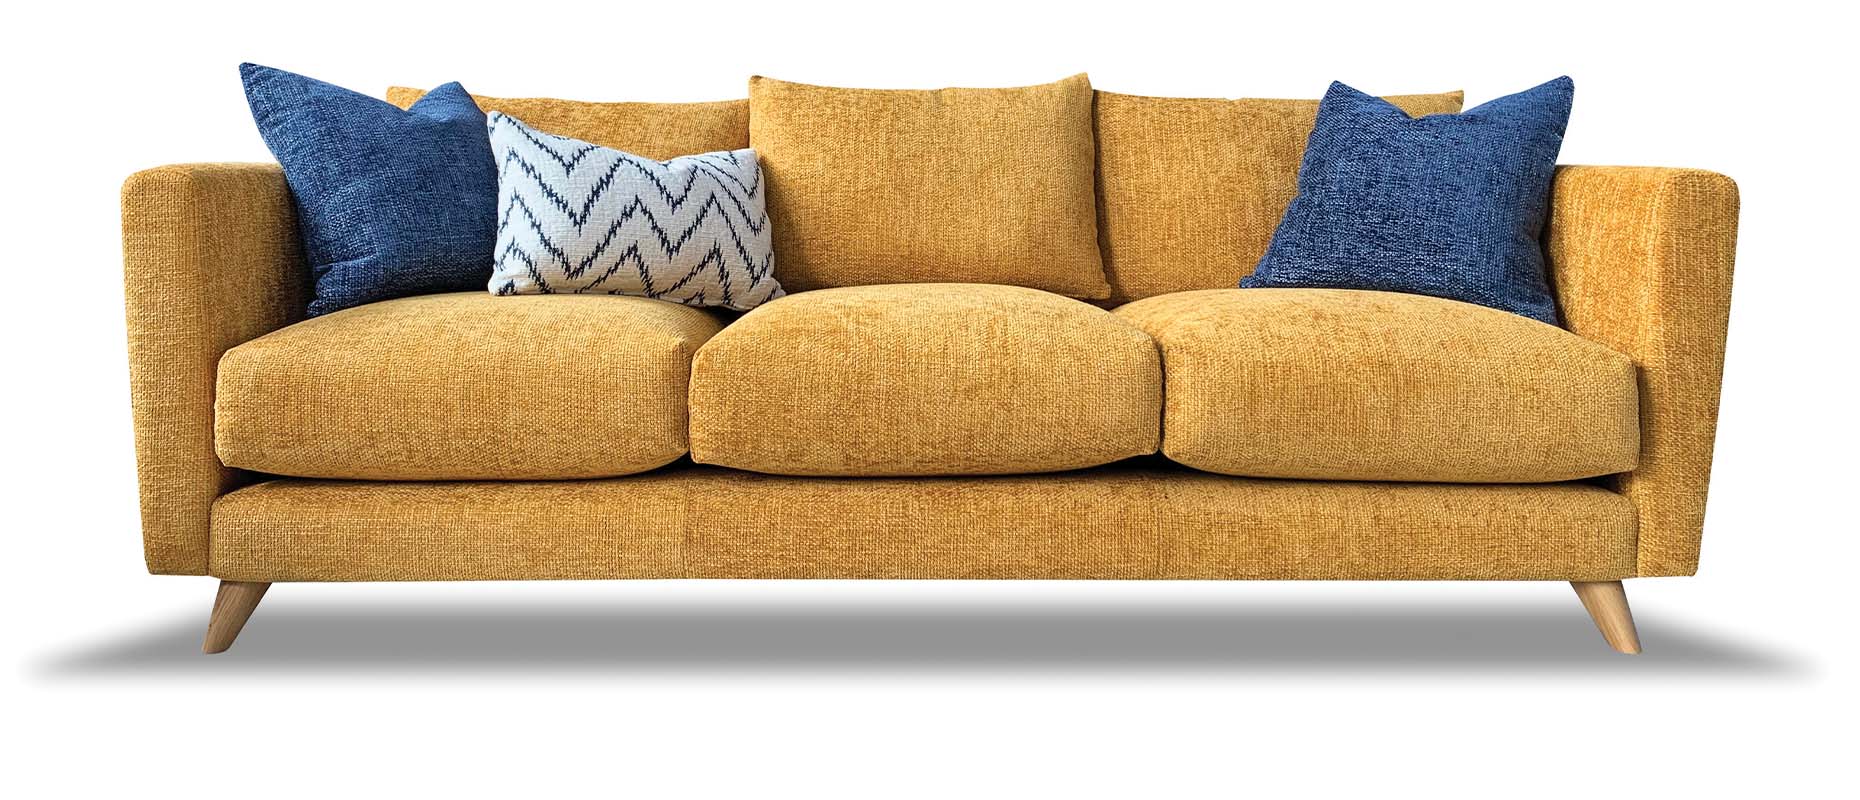 Soren sofa collection at Forrest Furnishing